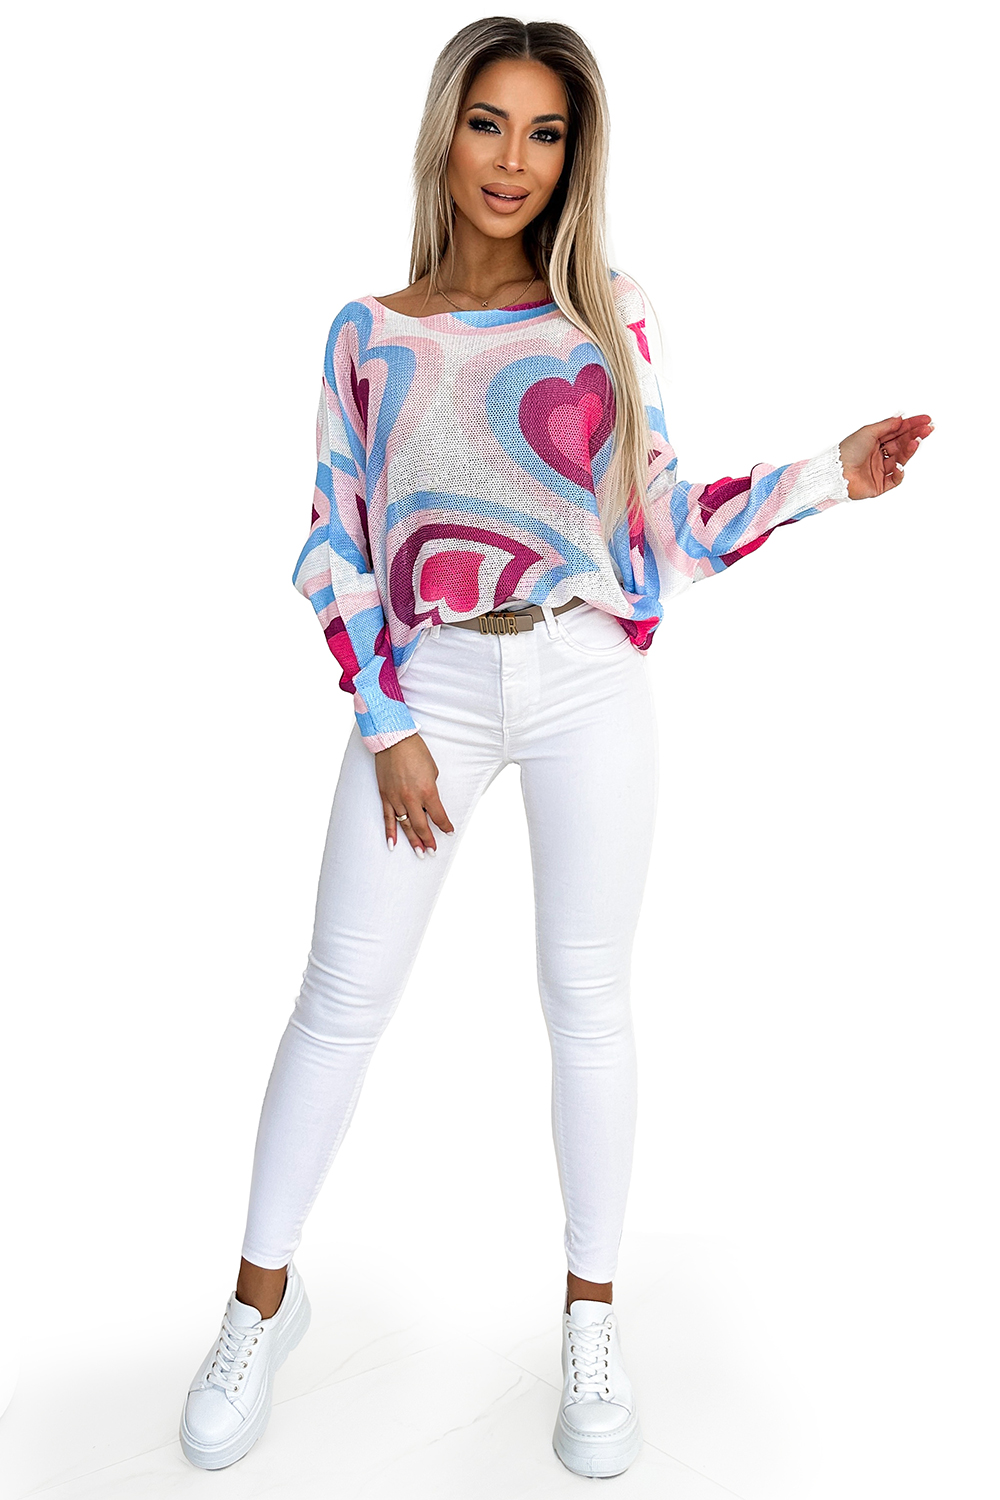 Oversize sweater with pink and blue hearts by Numoco